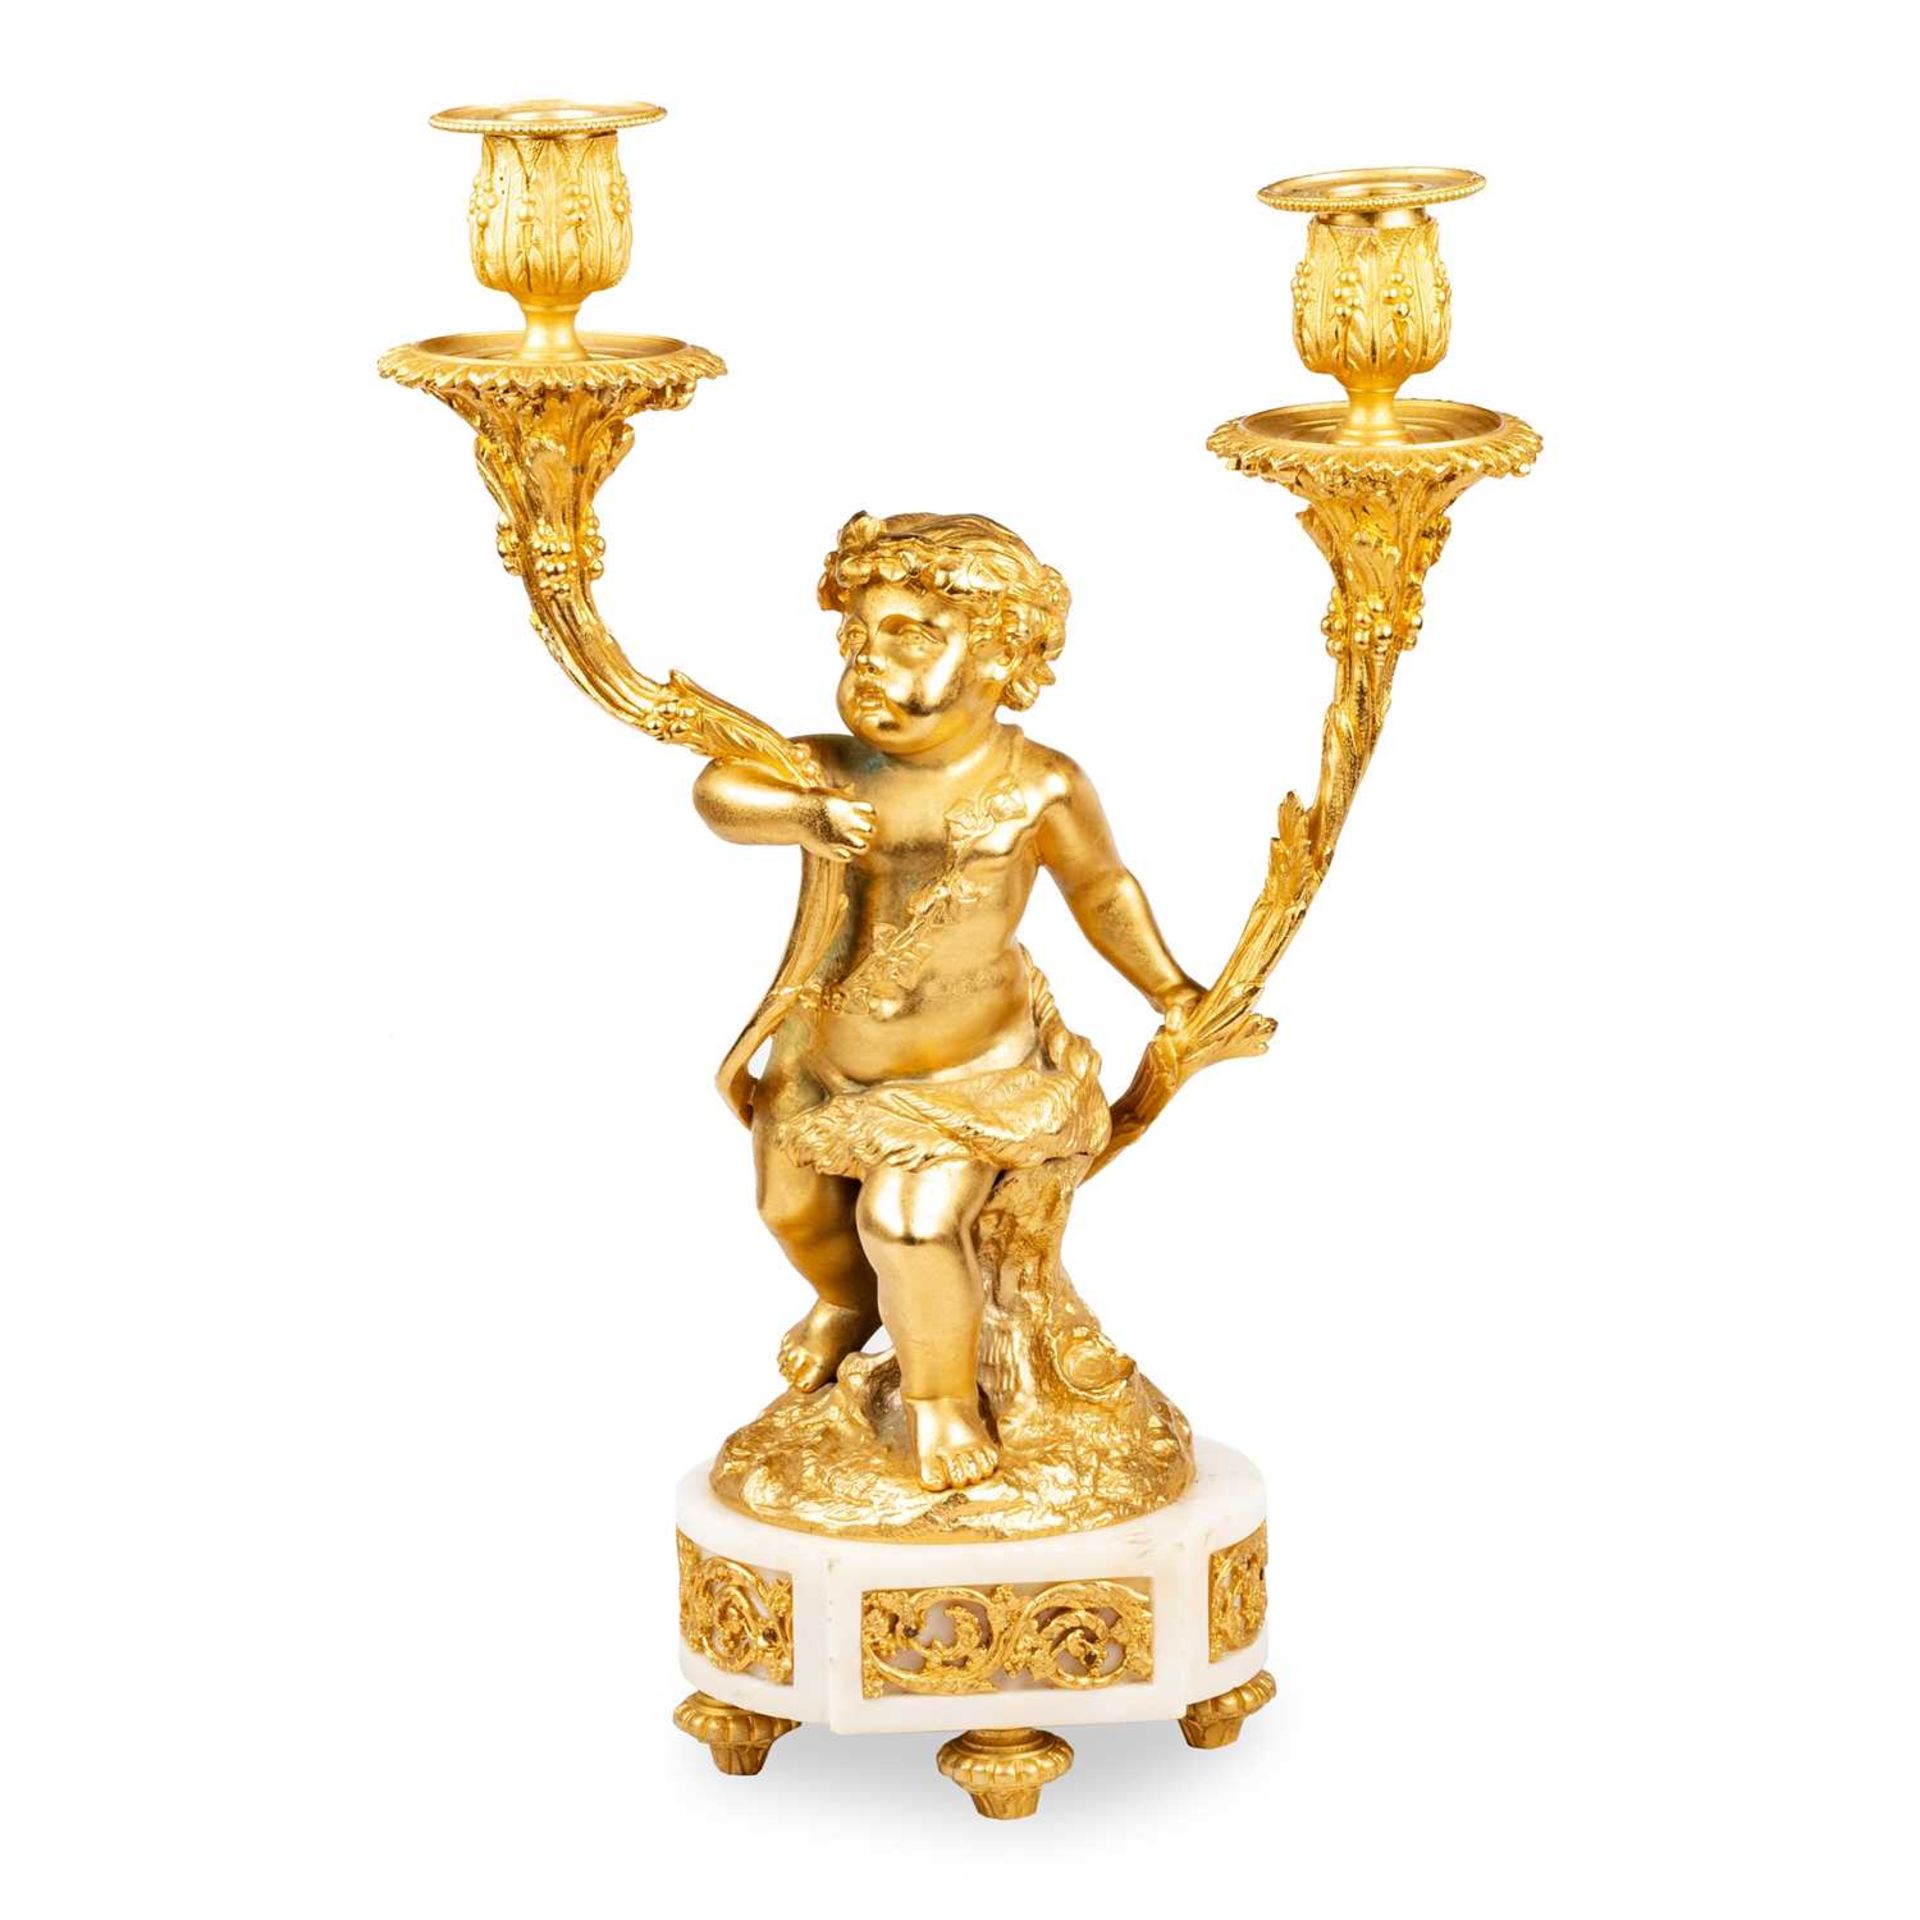 A PAIR OF LOUIS XVI STYLE GILT-BRONZE AND MARBLE FIGURAL TWO-LIGHT CANDELABRA After models by Claude - Image 2 of 3